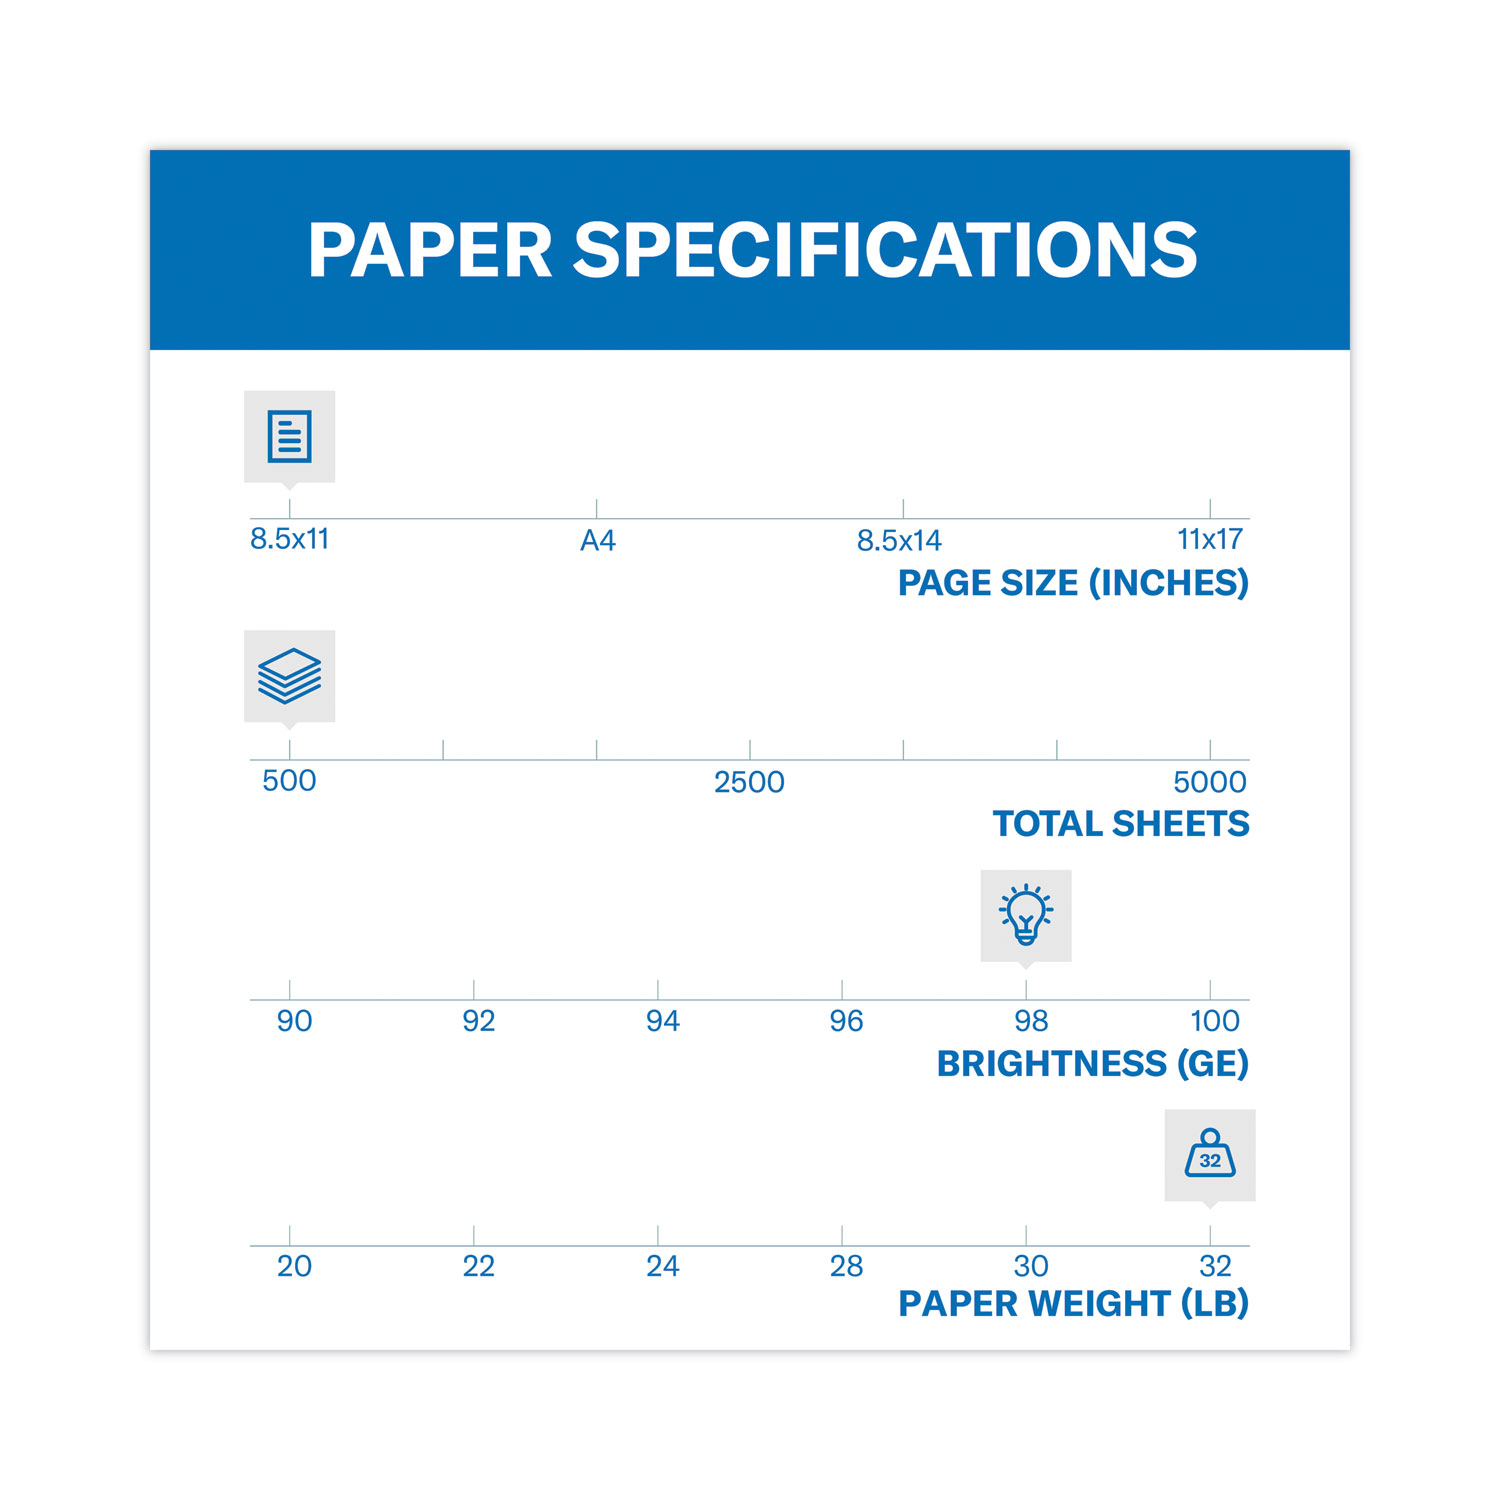 Premium Laser Print Paper, 98 Bright, 32 lb Bond Weight, 8.5 x 11, White,  500/Ream - Pointer Office Products